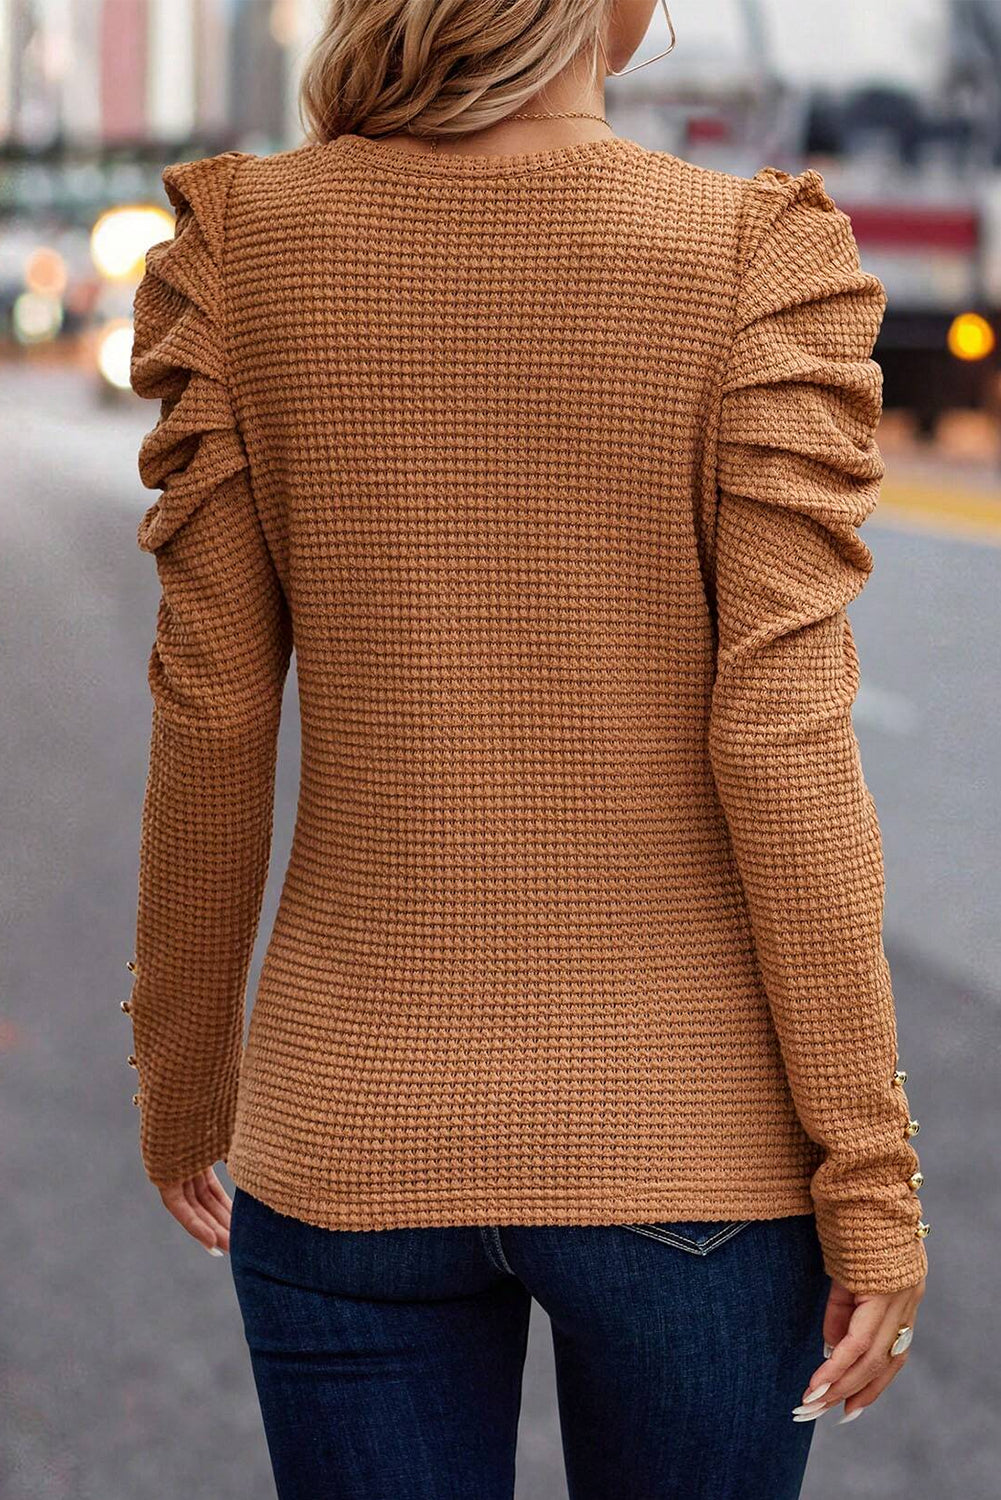 Chestnut Solid Color Textured Buttoned Gigot Sleeve Top - SELFTRITSS